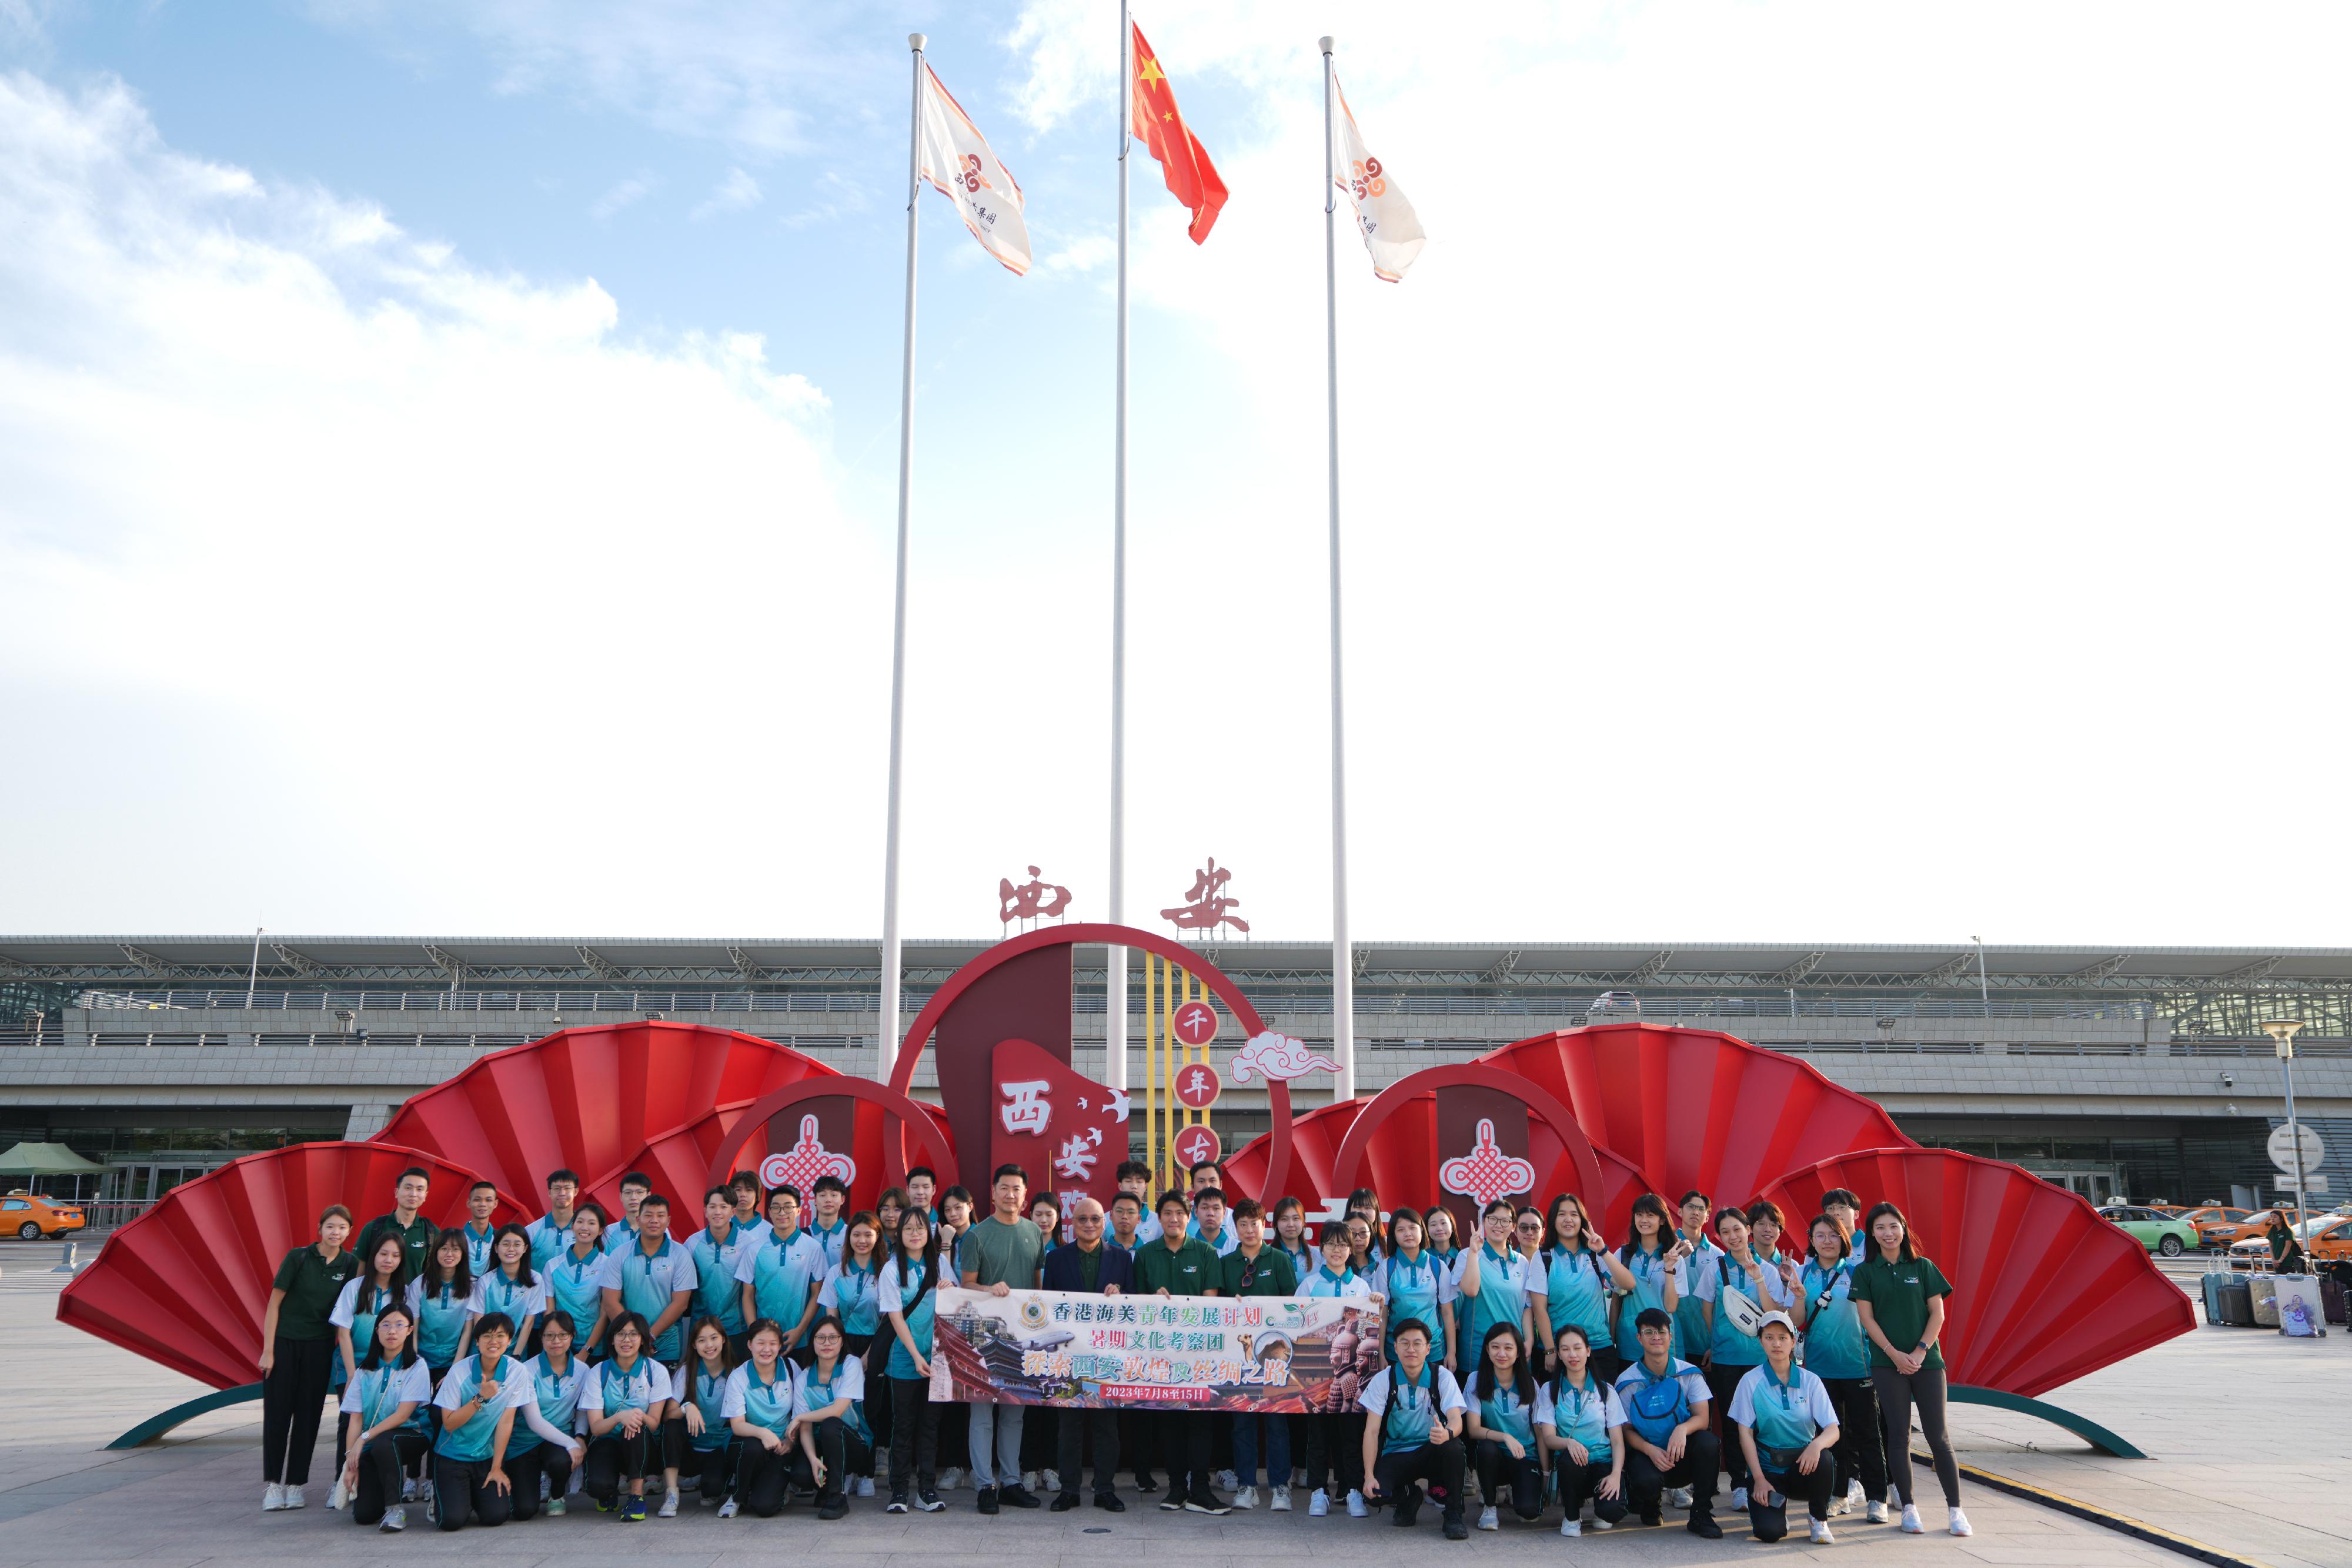 The Honorary Founding Executive Director of the Executive Committee, Mr Edgar Kwan (first row, ninth right); the Vice-Chairman, Mr Desmond Yip (first row, ninth left); and committee member Mr Mark Mak (first row, eighth right), of "Customs YES" on July 8 led 50 members of "Customs YES" on an eight-day Silk Road summer cultural study tour.